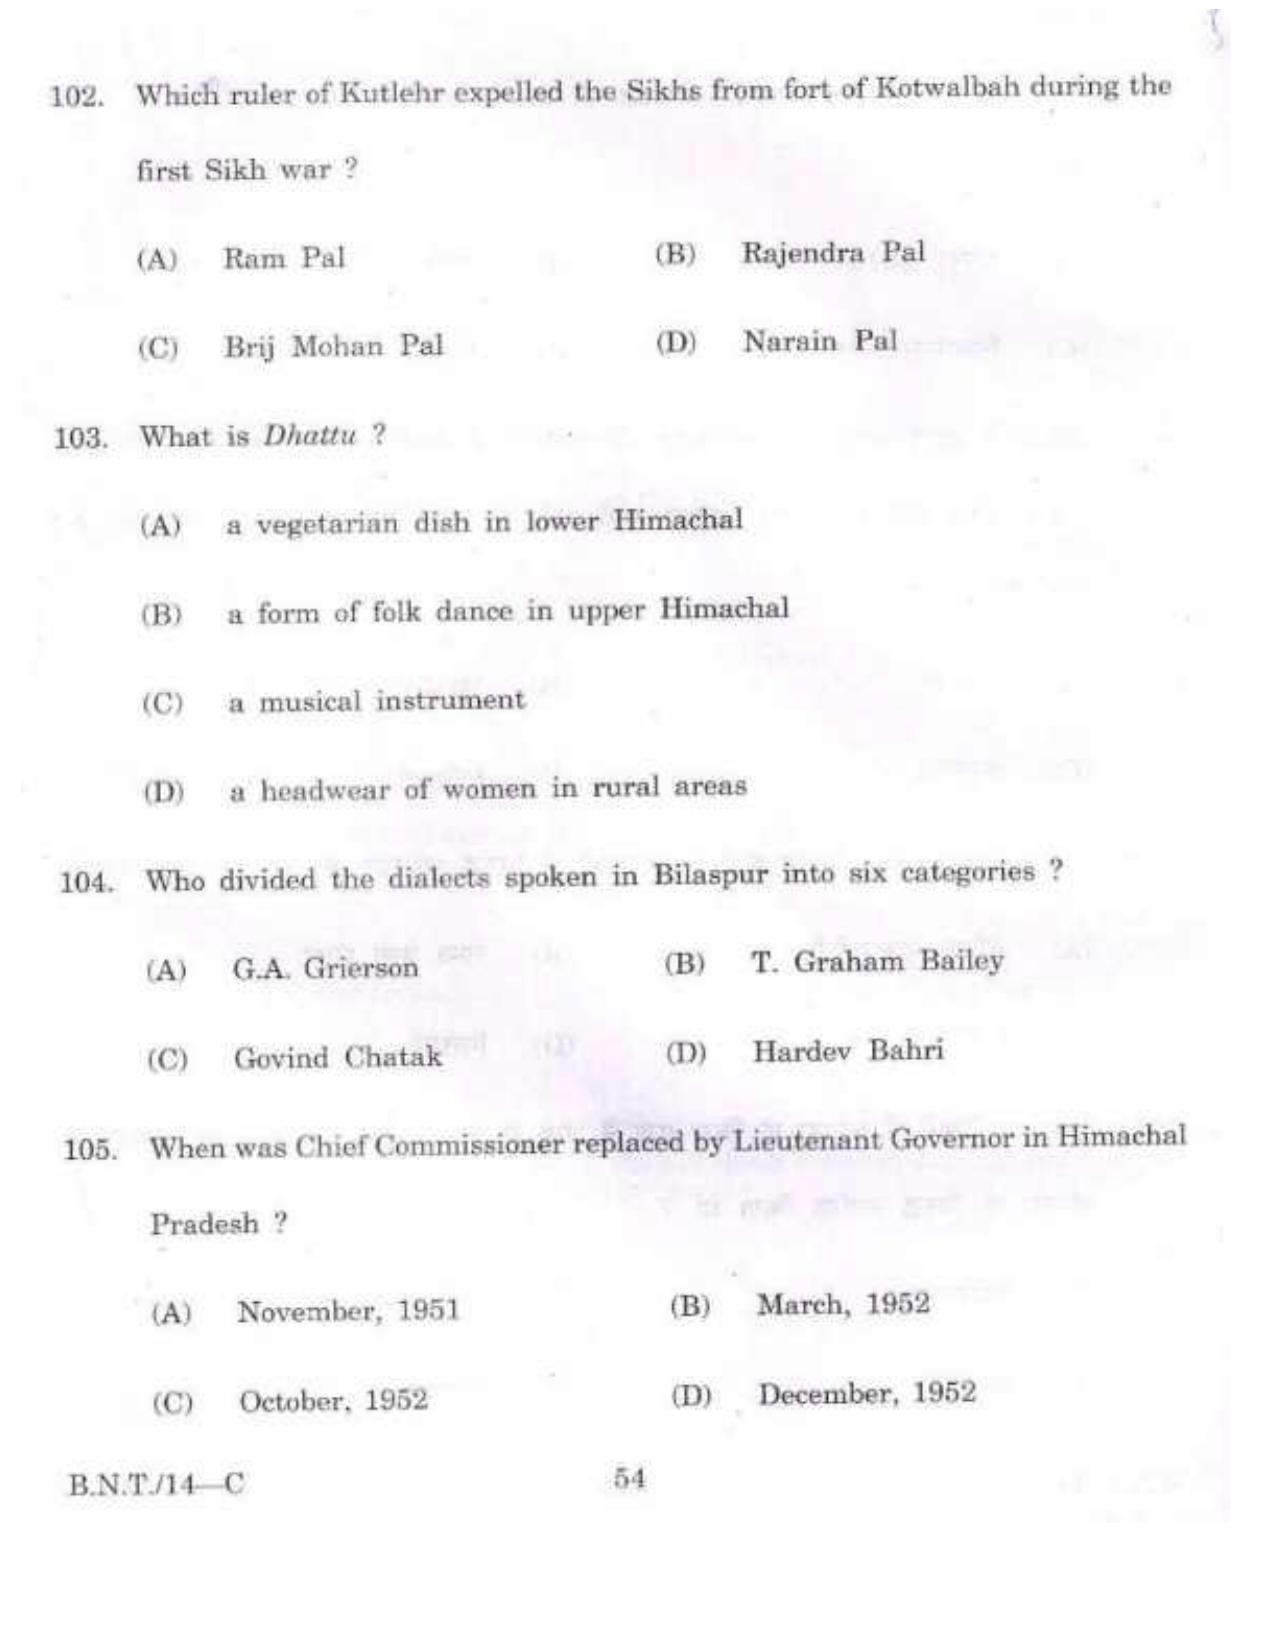 BSMFC Recovery Agent Old Question Papers for General Knowledge - Page 54